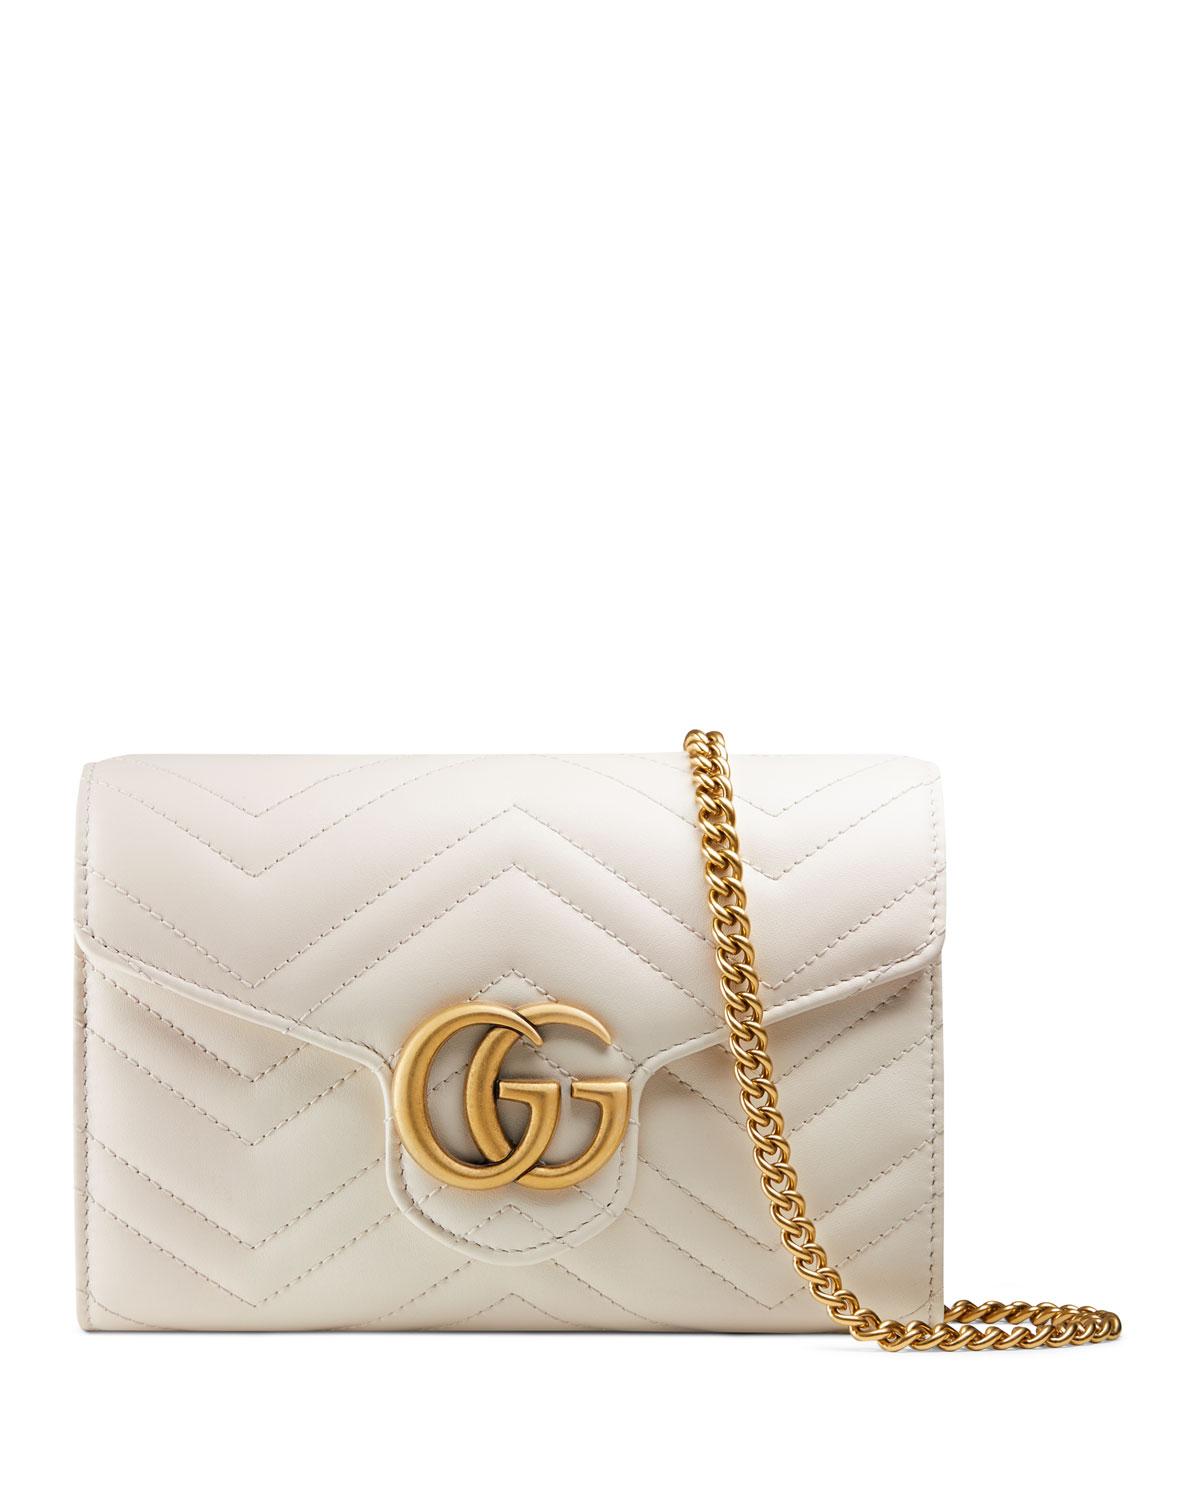 Gucci Gg Marmont Matelassé Leather Wallet On A Chain in White - Lyst